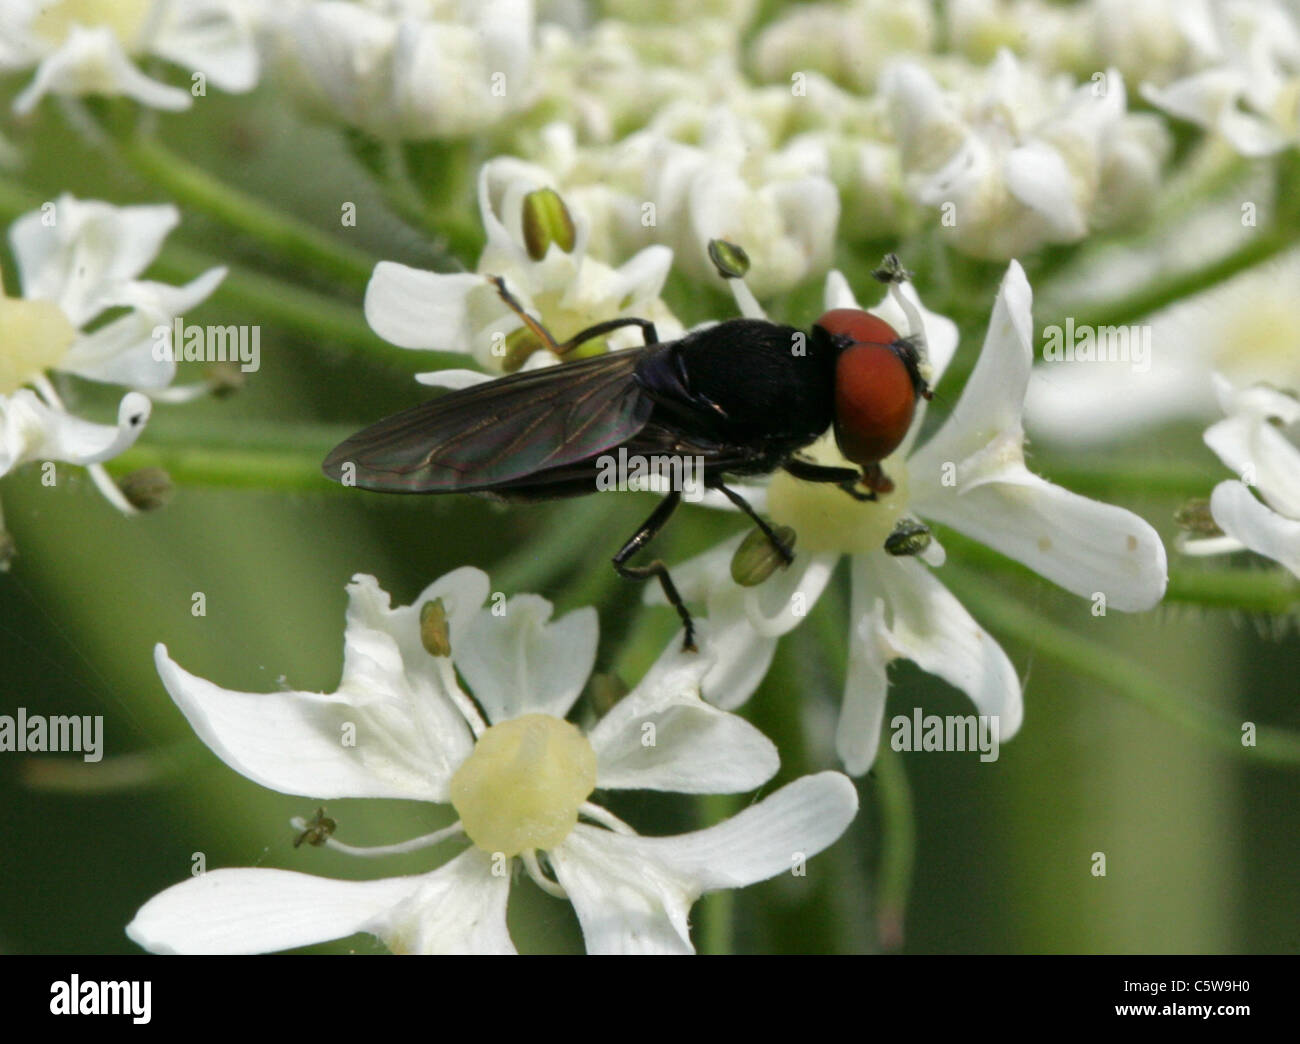 Hoverfly, Chrysogaster solstitialis, Syrphidae, Diptera. Male. Stock Photo